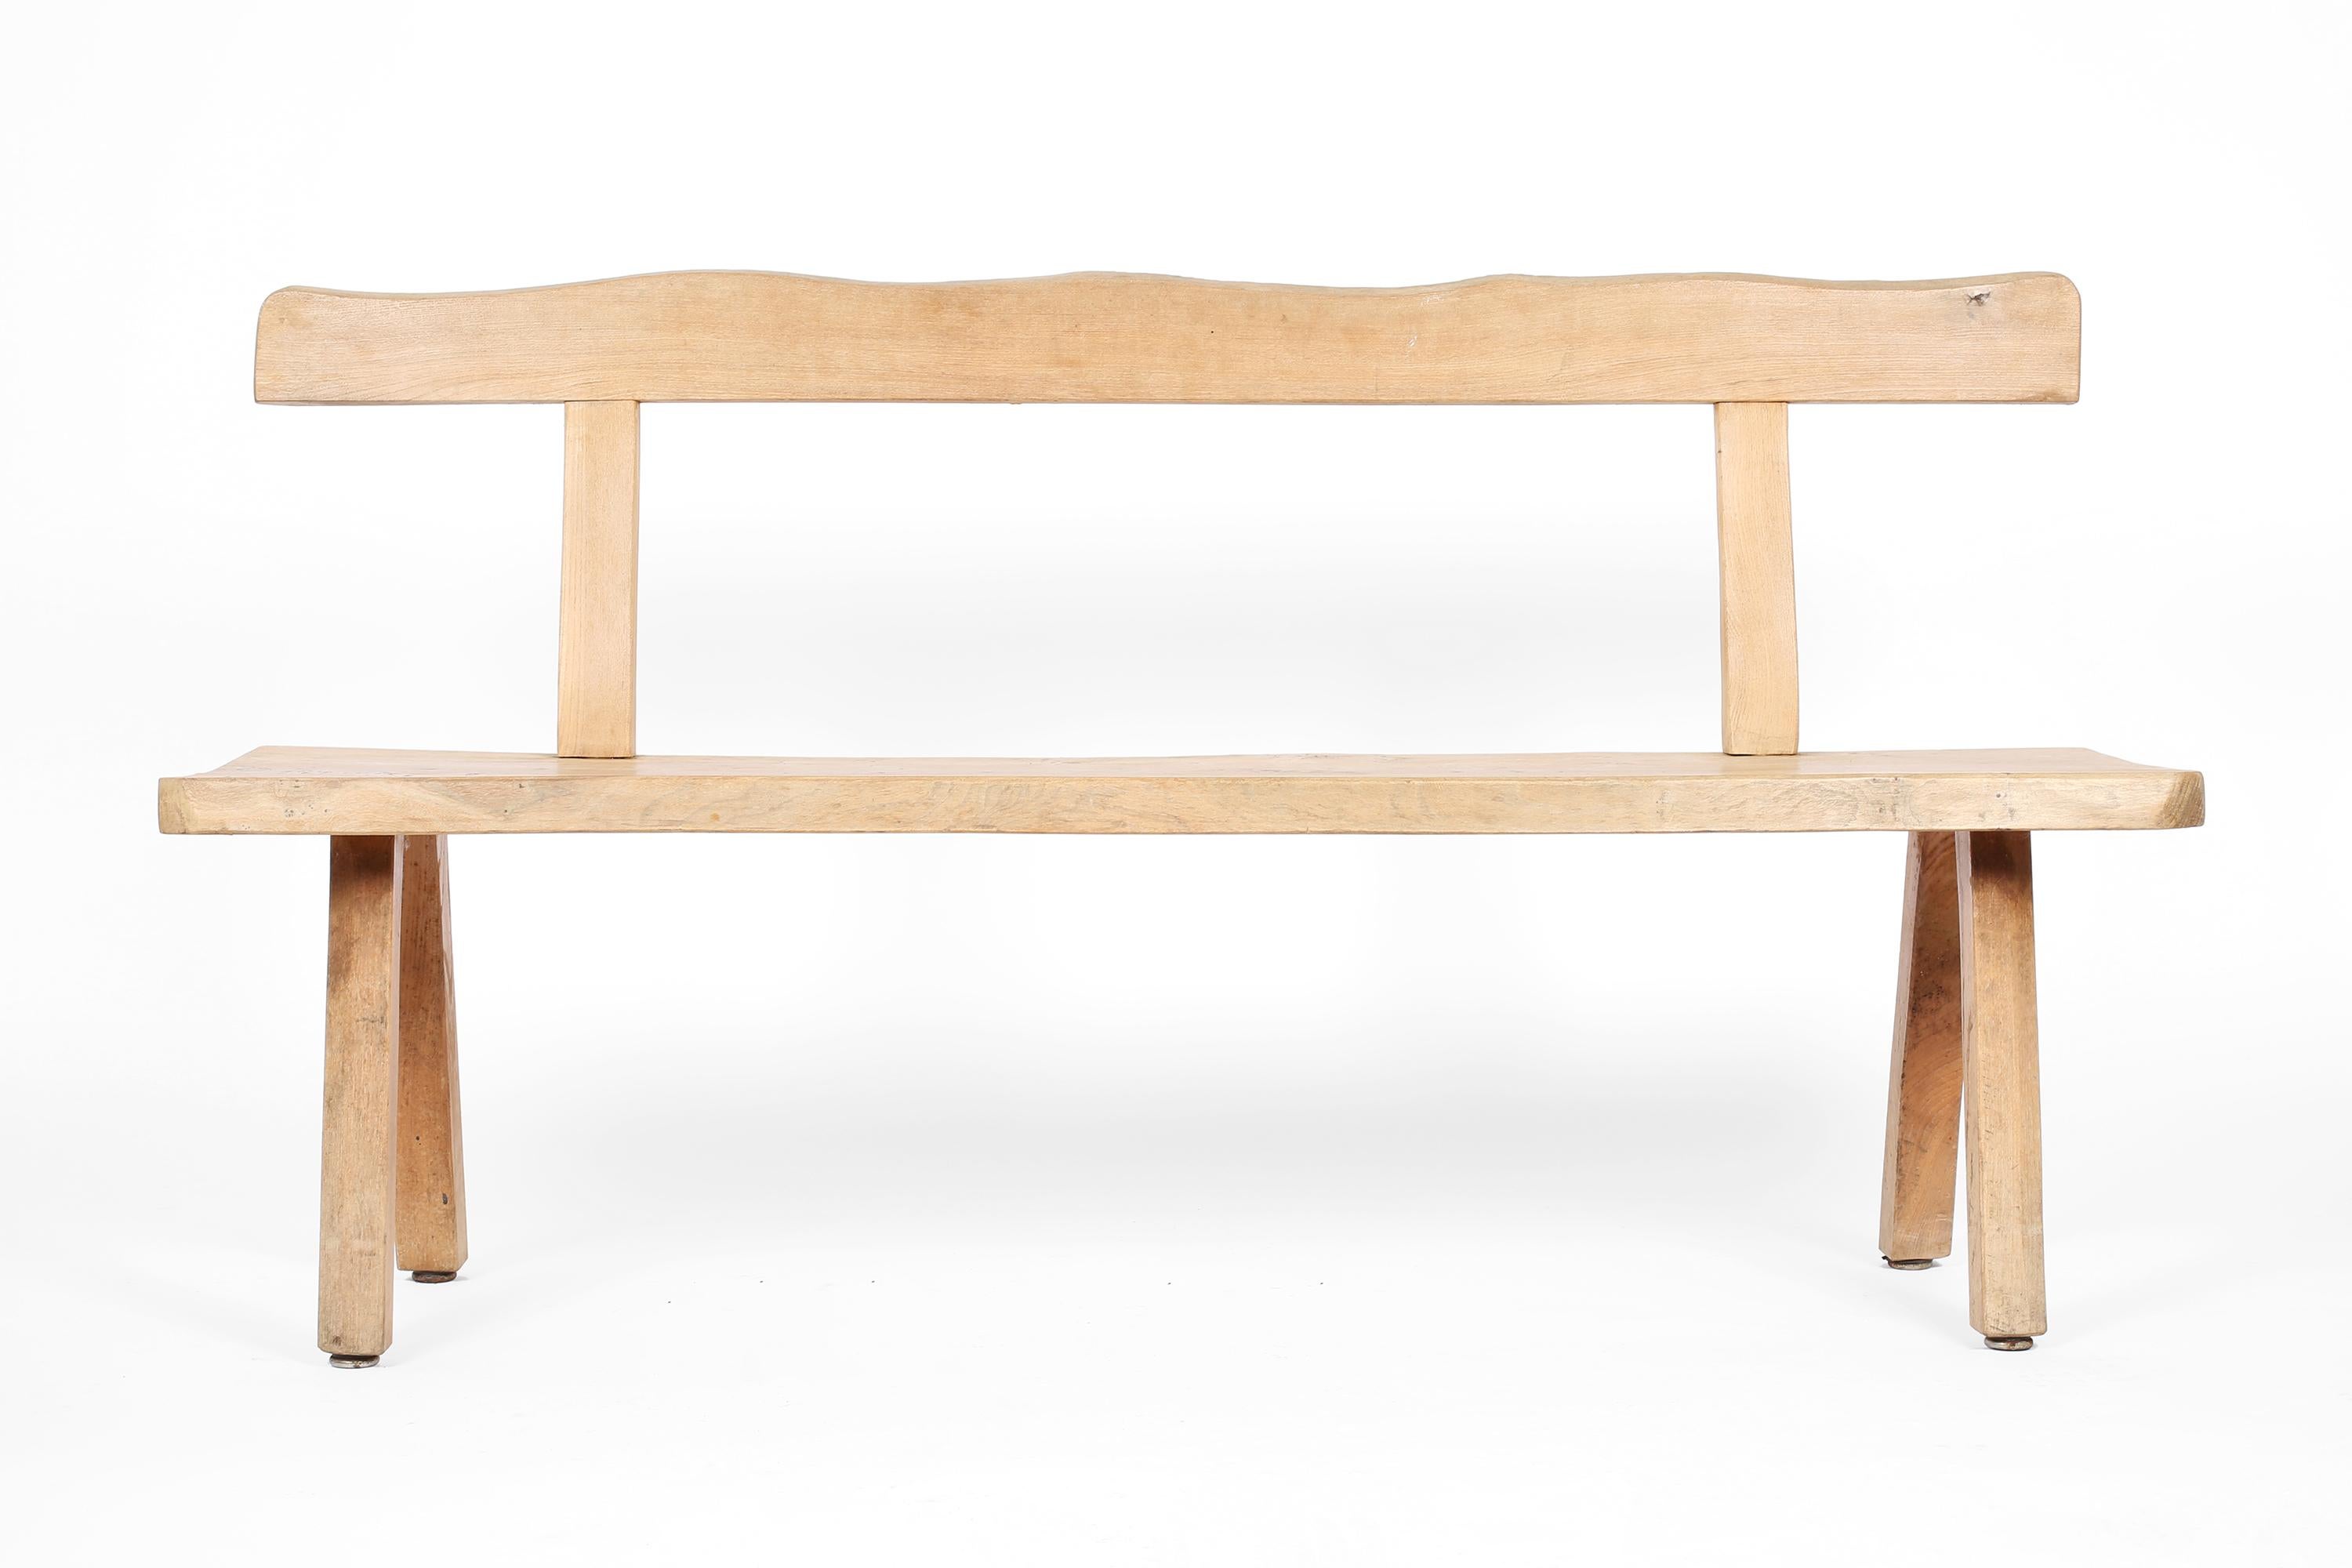 A stripped solid elm bench attributed to Olavi Hanninen for Mikko Nupponen. Finnish, c. 1960s.